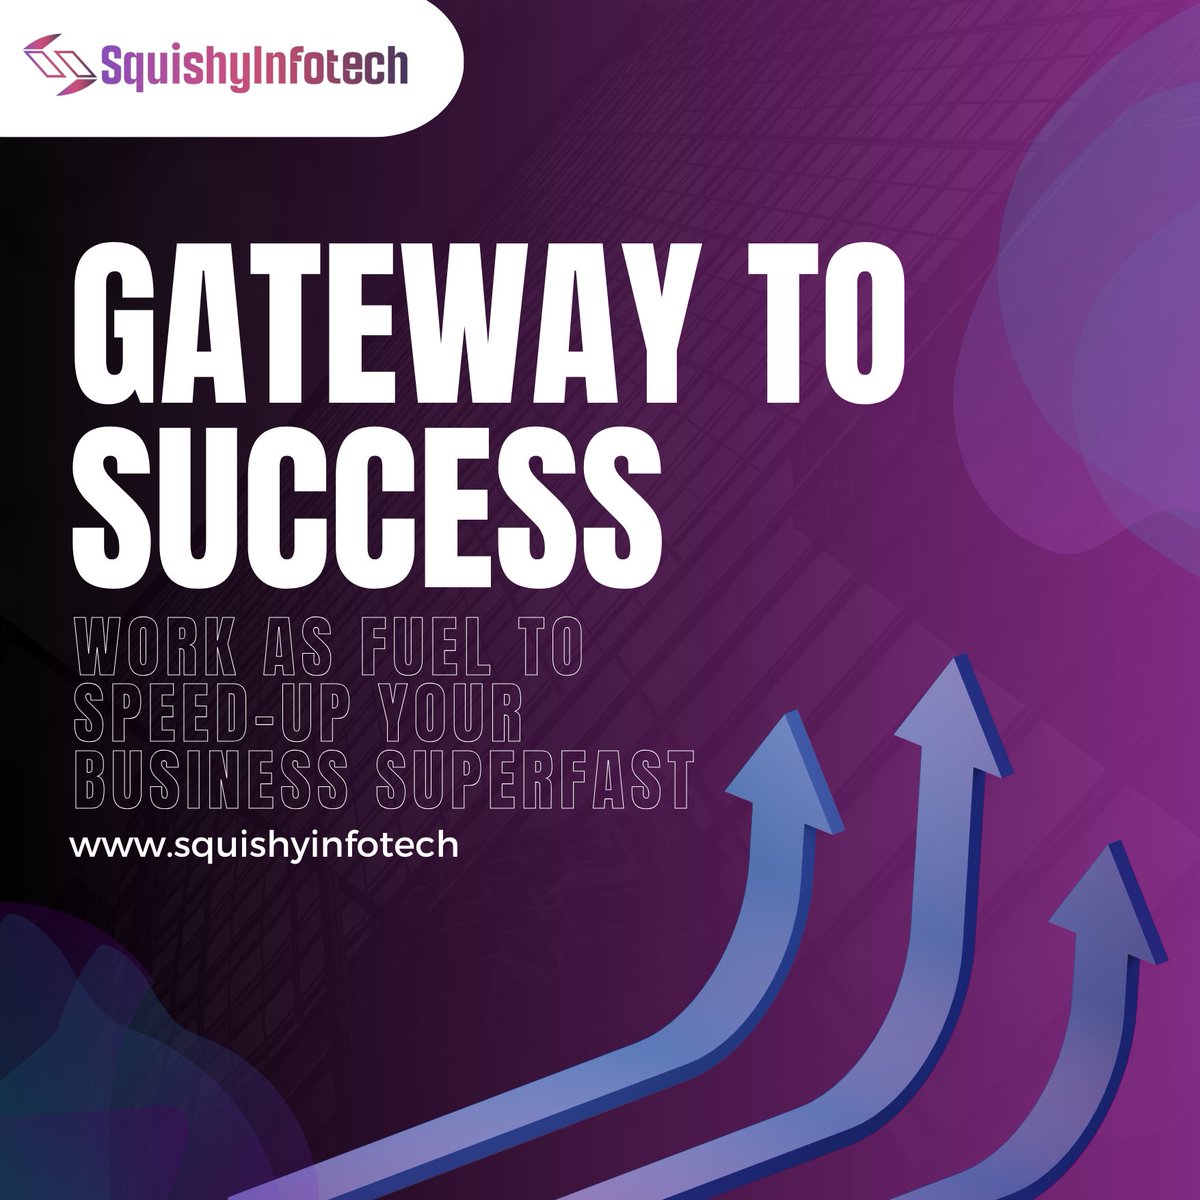 Success starts with secure transactions. Trust our payment gateway to pave the way. 
#PaymentGateway
#SuccessUnlocked
#SuccessJourney
#FuelYourSuccess
#GatewayToSuccess
#squishyinfotech
#paymentgateway
#paymentgatewayintegration
#onlinetransactions
#Paymentserviceprovider